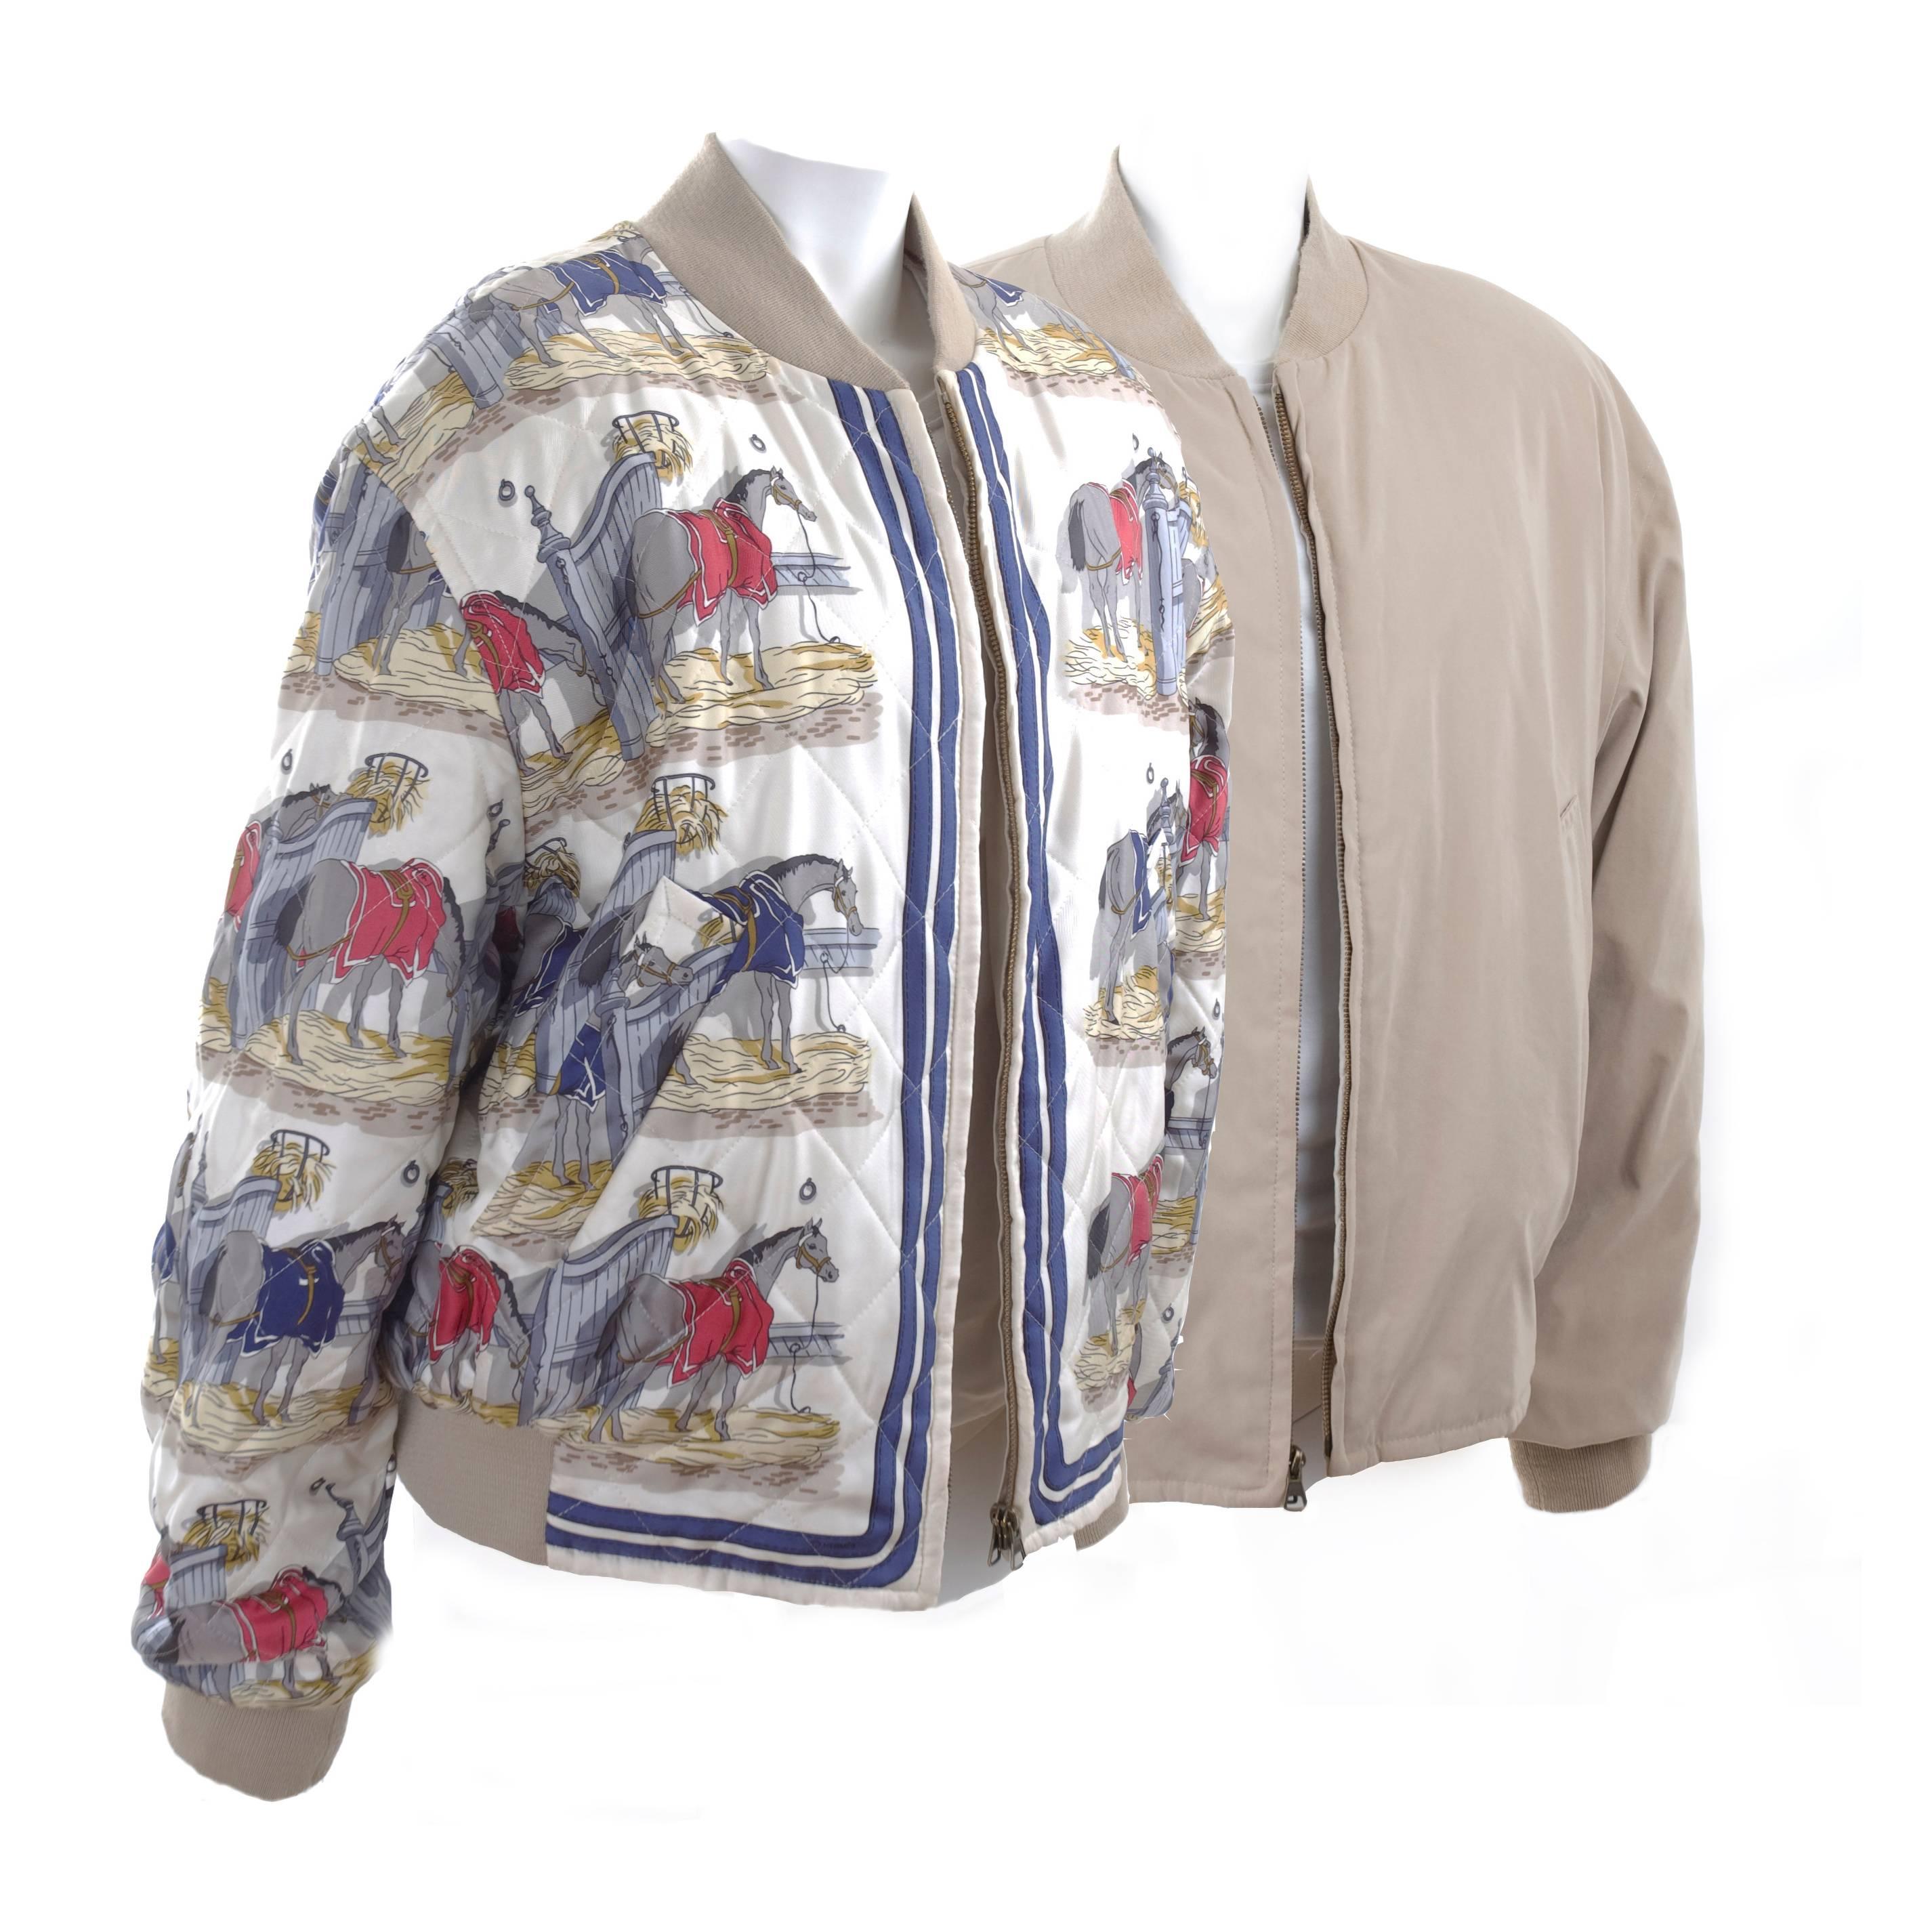 Beautiful Hermes - Ecuries - silk reversible men's jacket. The print with Equestrian horses is in creme, blue beige and some red. 
The revers side is solid beige. Size: 52 EU  
Excellent condition - just been dry cleaned. 
Measurements: Length 27 -